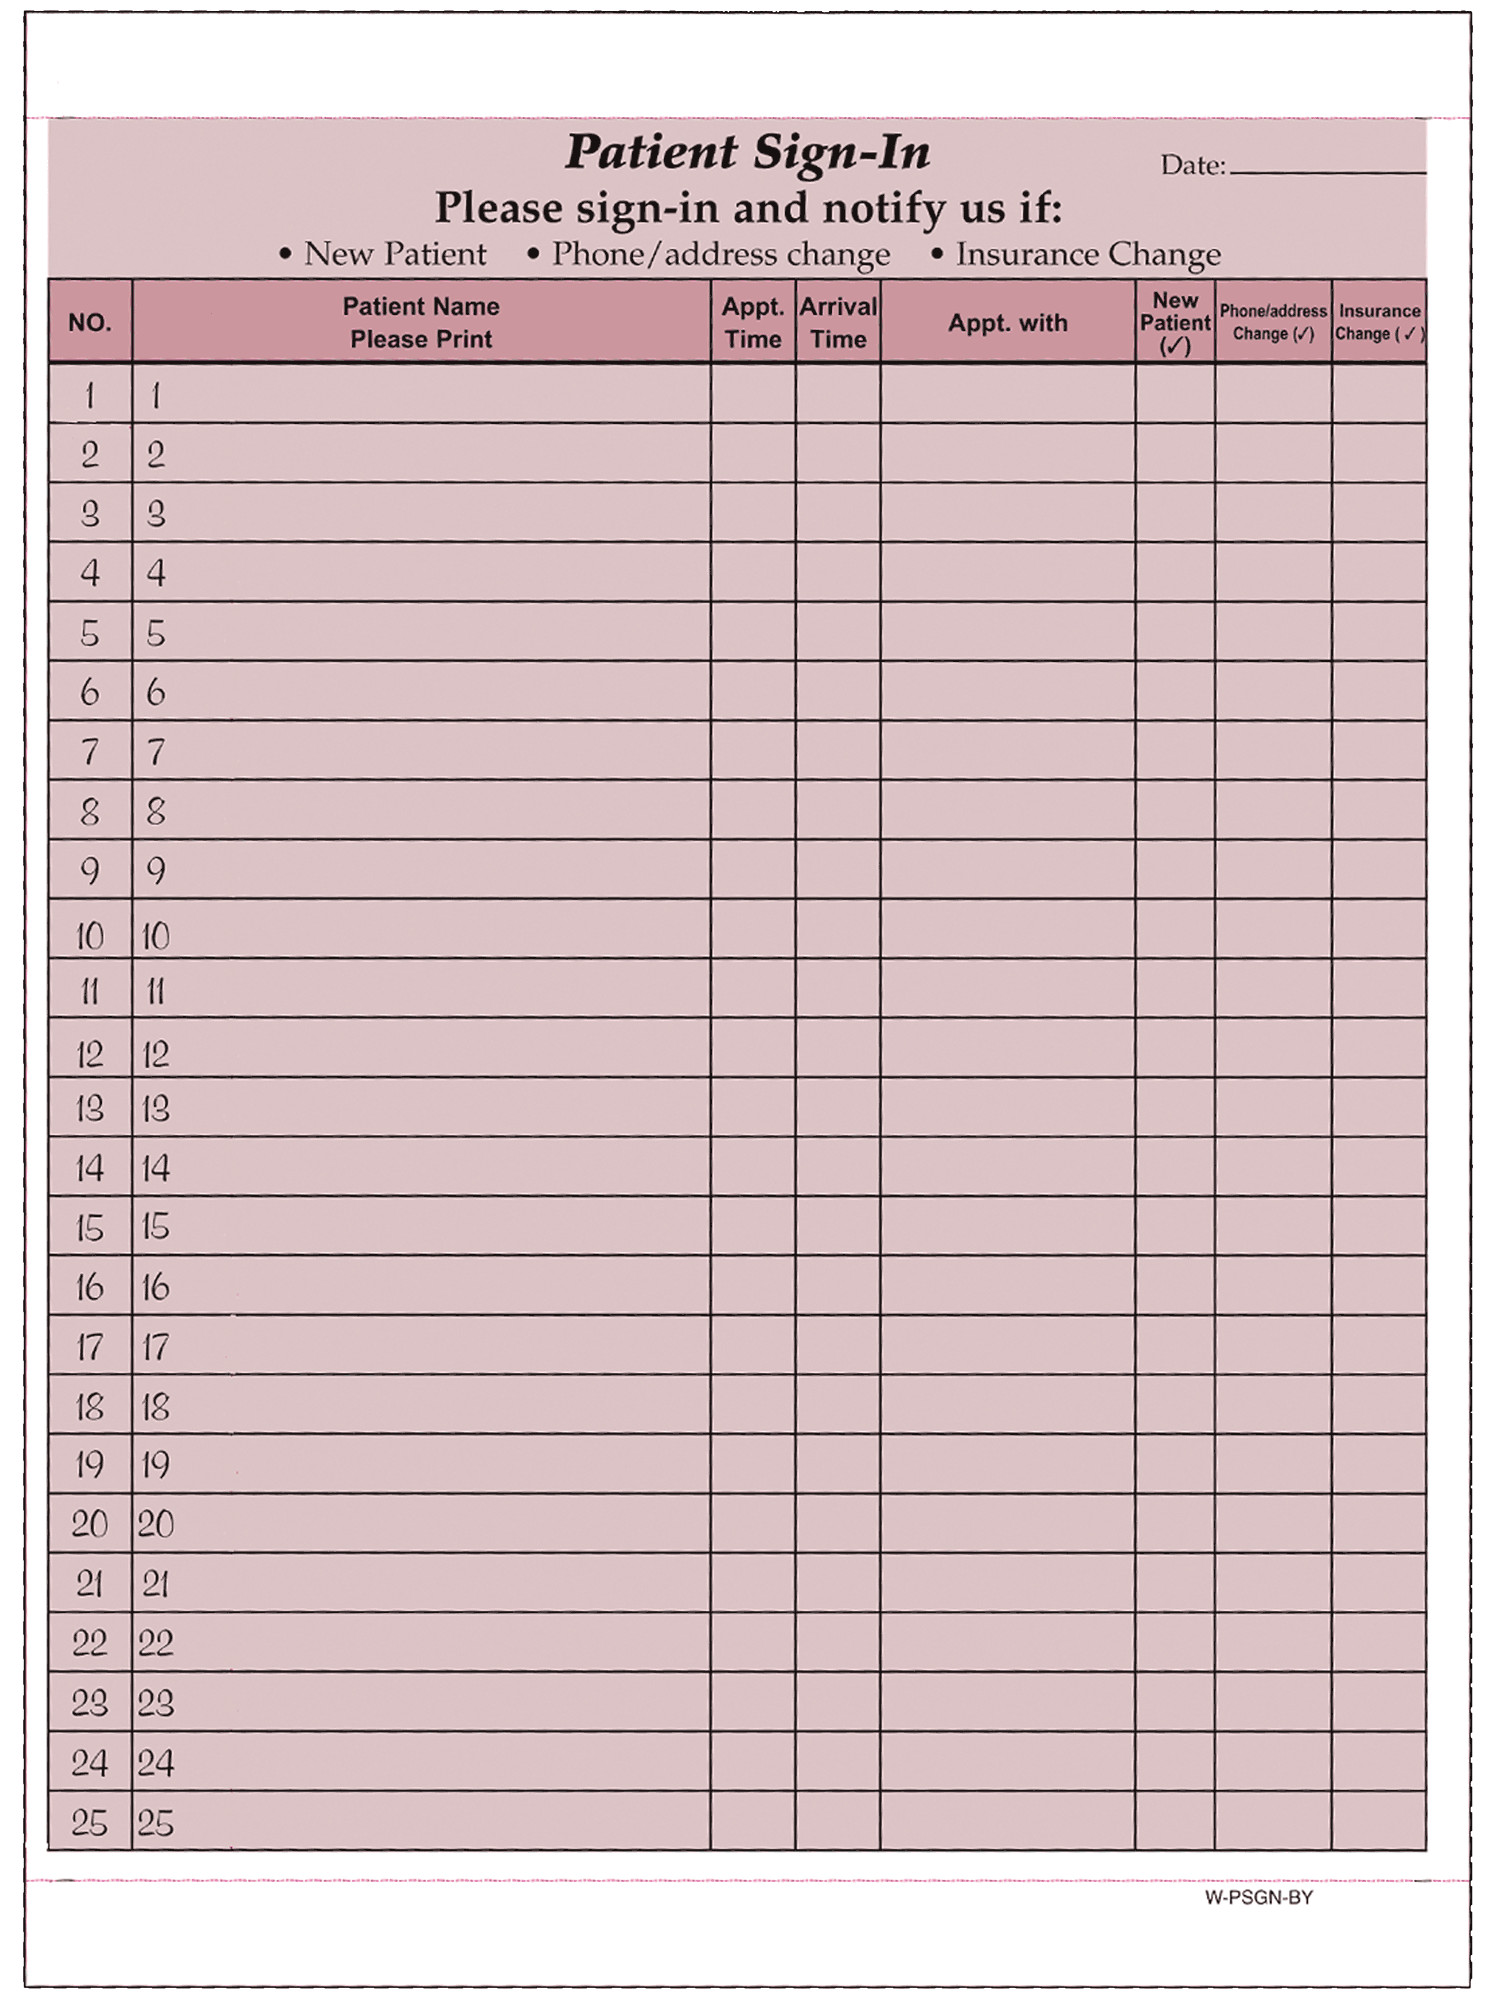 HIPAA Patient Sign in Sheets